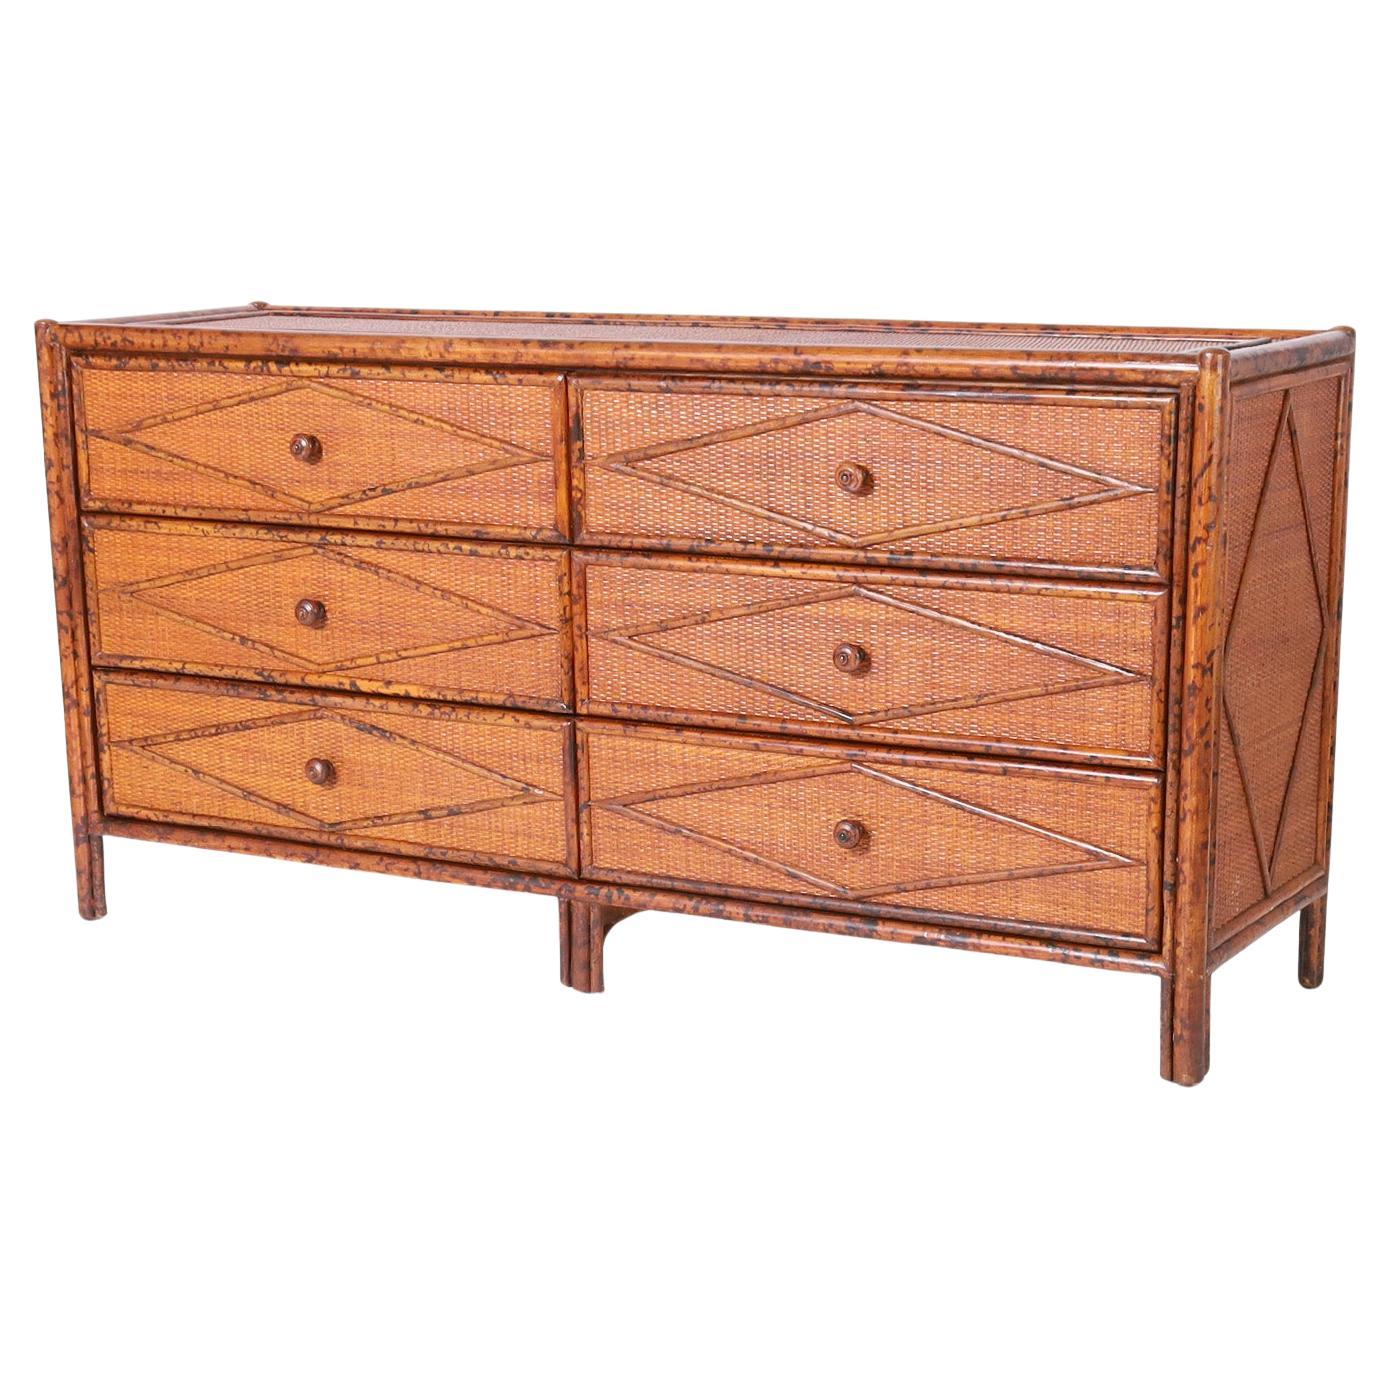 Faux Bamboo and Grasscloth Chest or Dresser